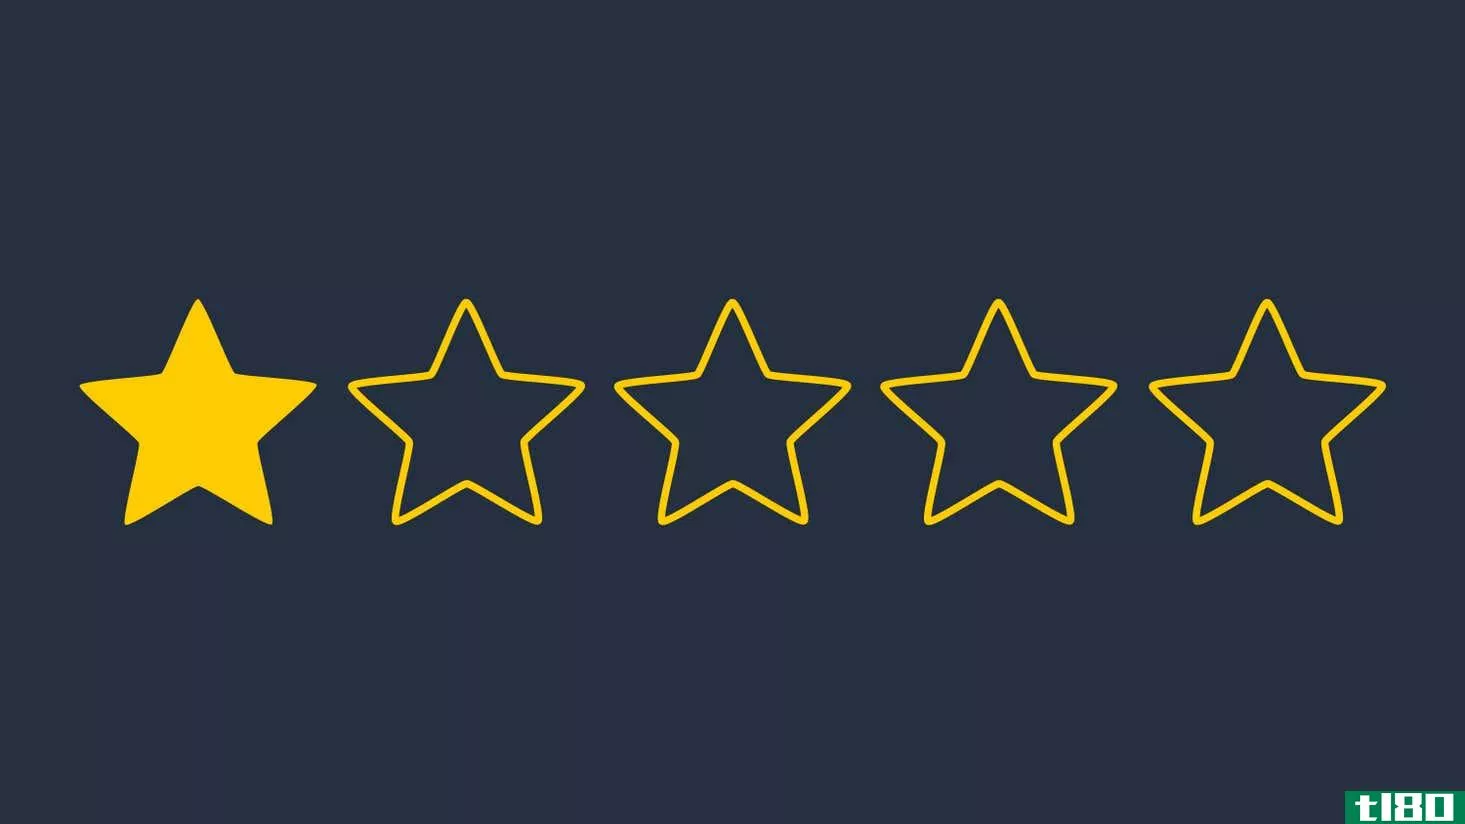 An illustration of five stars in a row against a blue background with one filled in gold and the rest not filled in